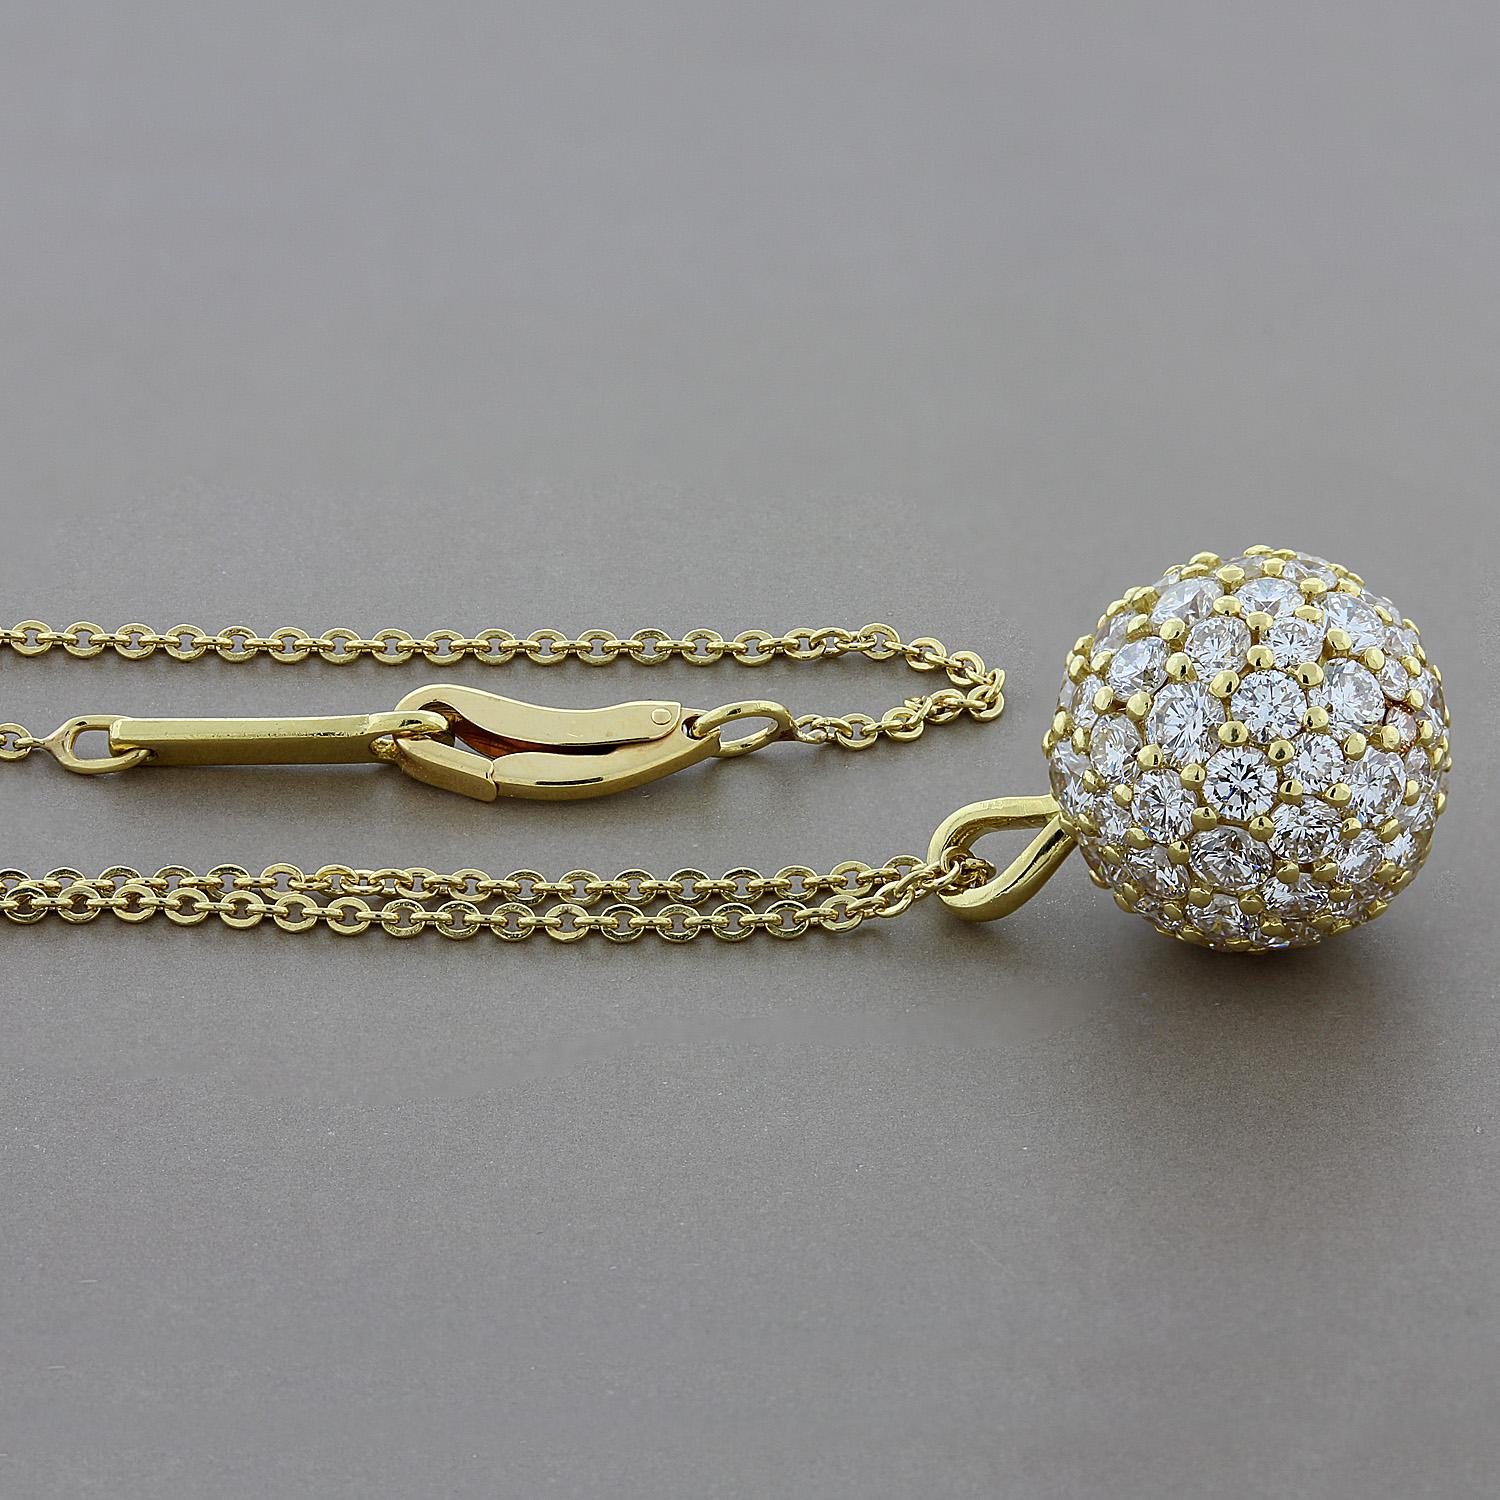 Presenting a Jose Hess pendant featuring 3.50 carats of different sized round cut diamonds set in 18K yellow gold. This piece is as fun as it is elegant. 

Chain Length: 21.50 inches
Pendant Length: 0.75 inch
Pendant Width: 0.5 inch